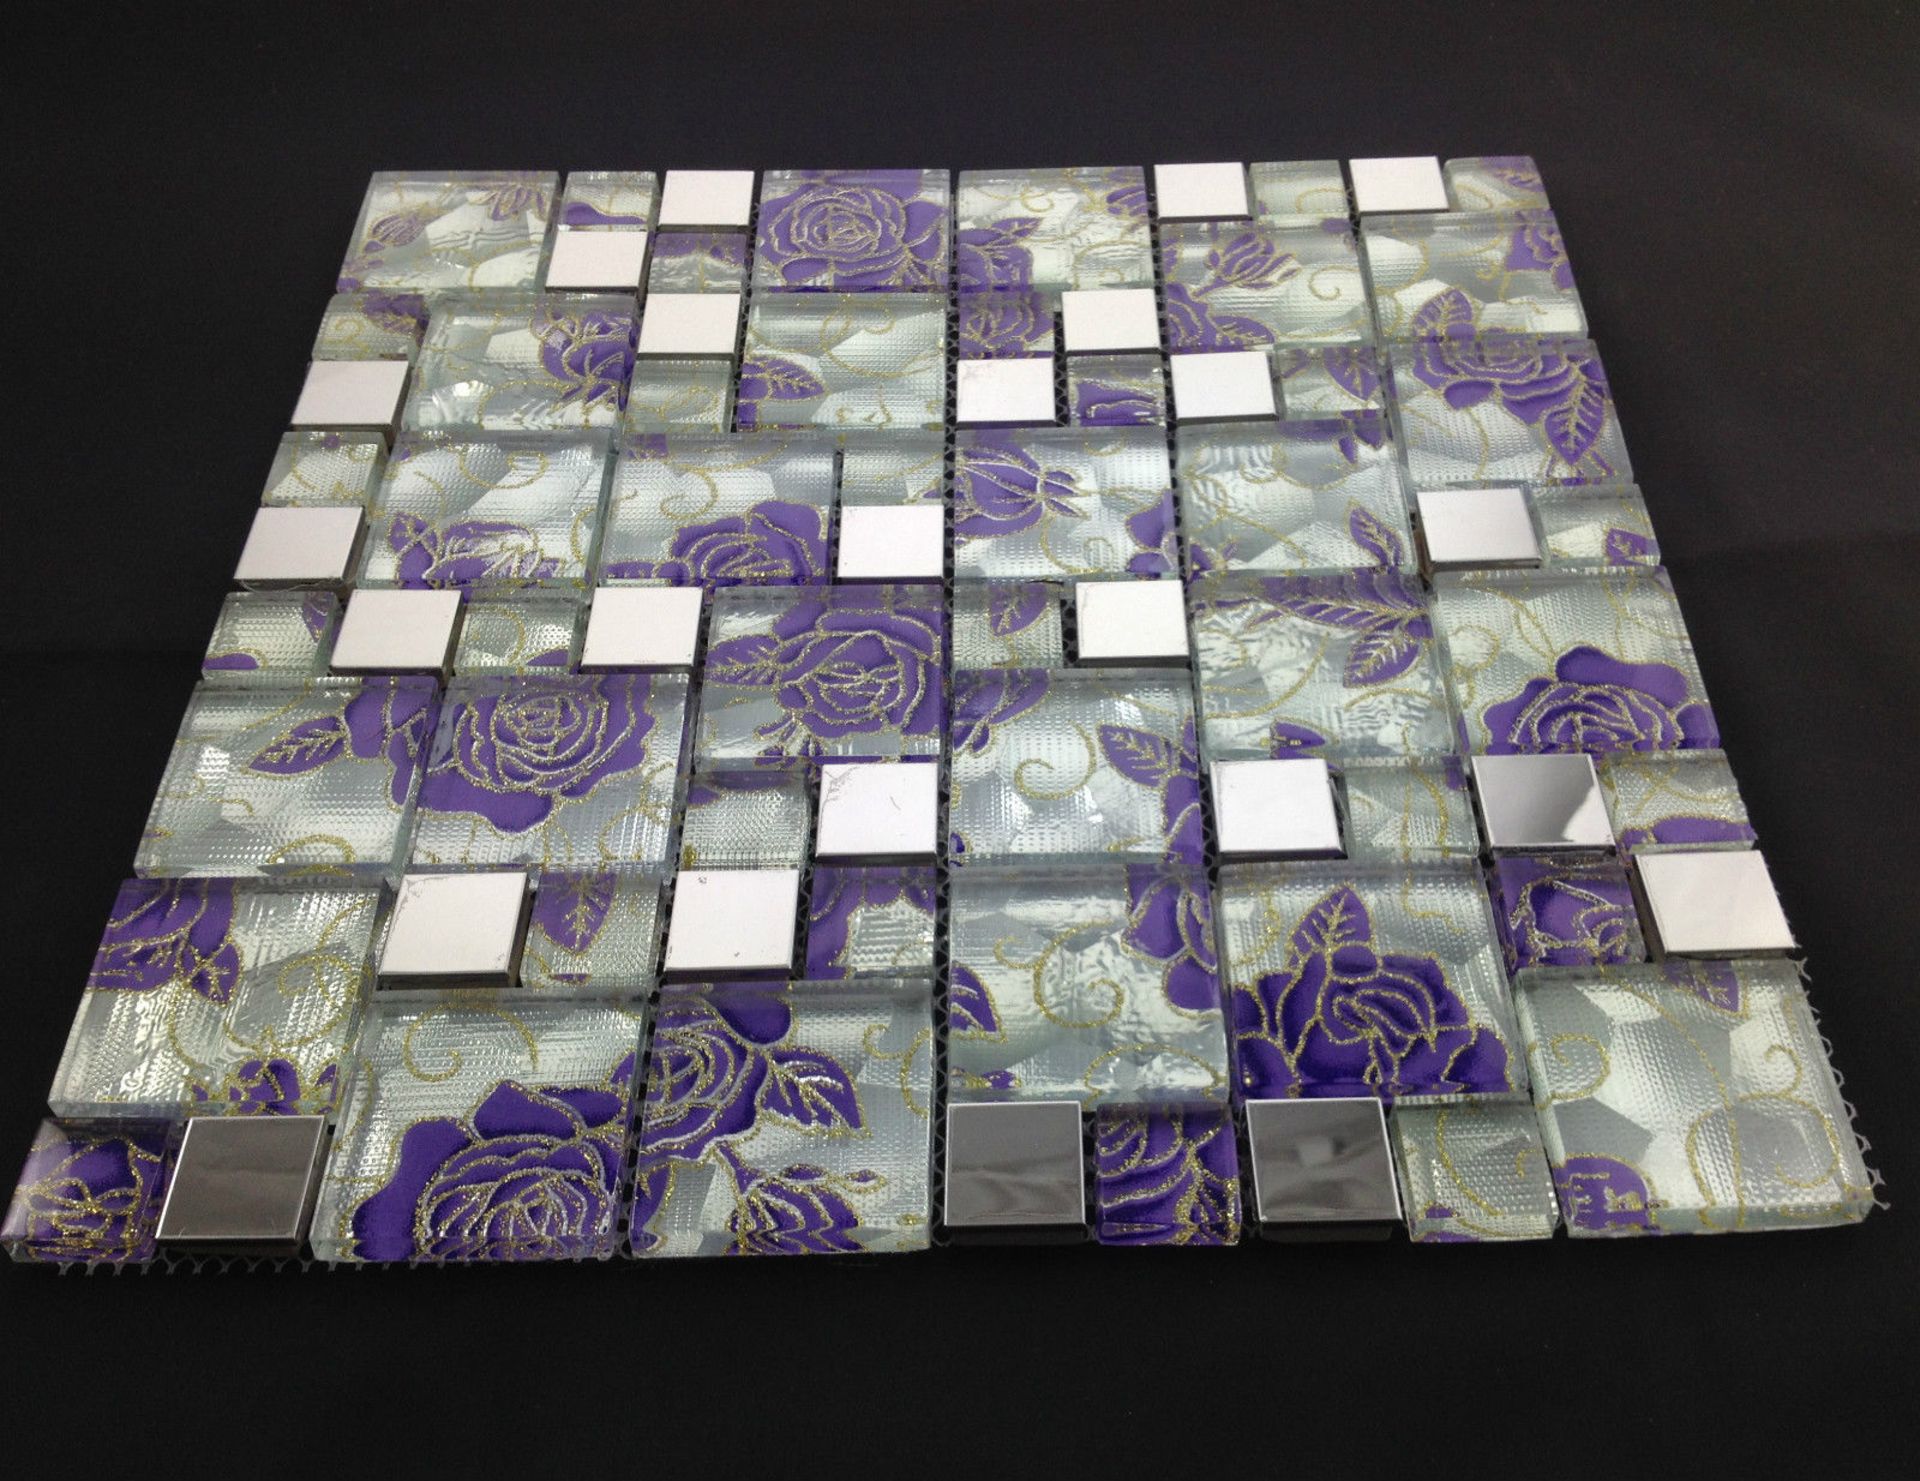 10 Square Metres - High Quality Glass/Stainless Steel Mosaic Tiles - Image 5 of 5